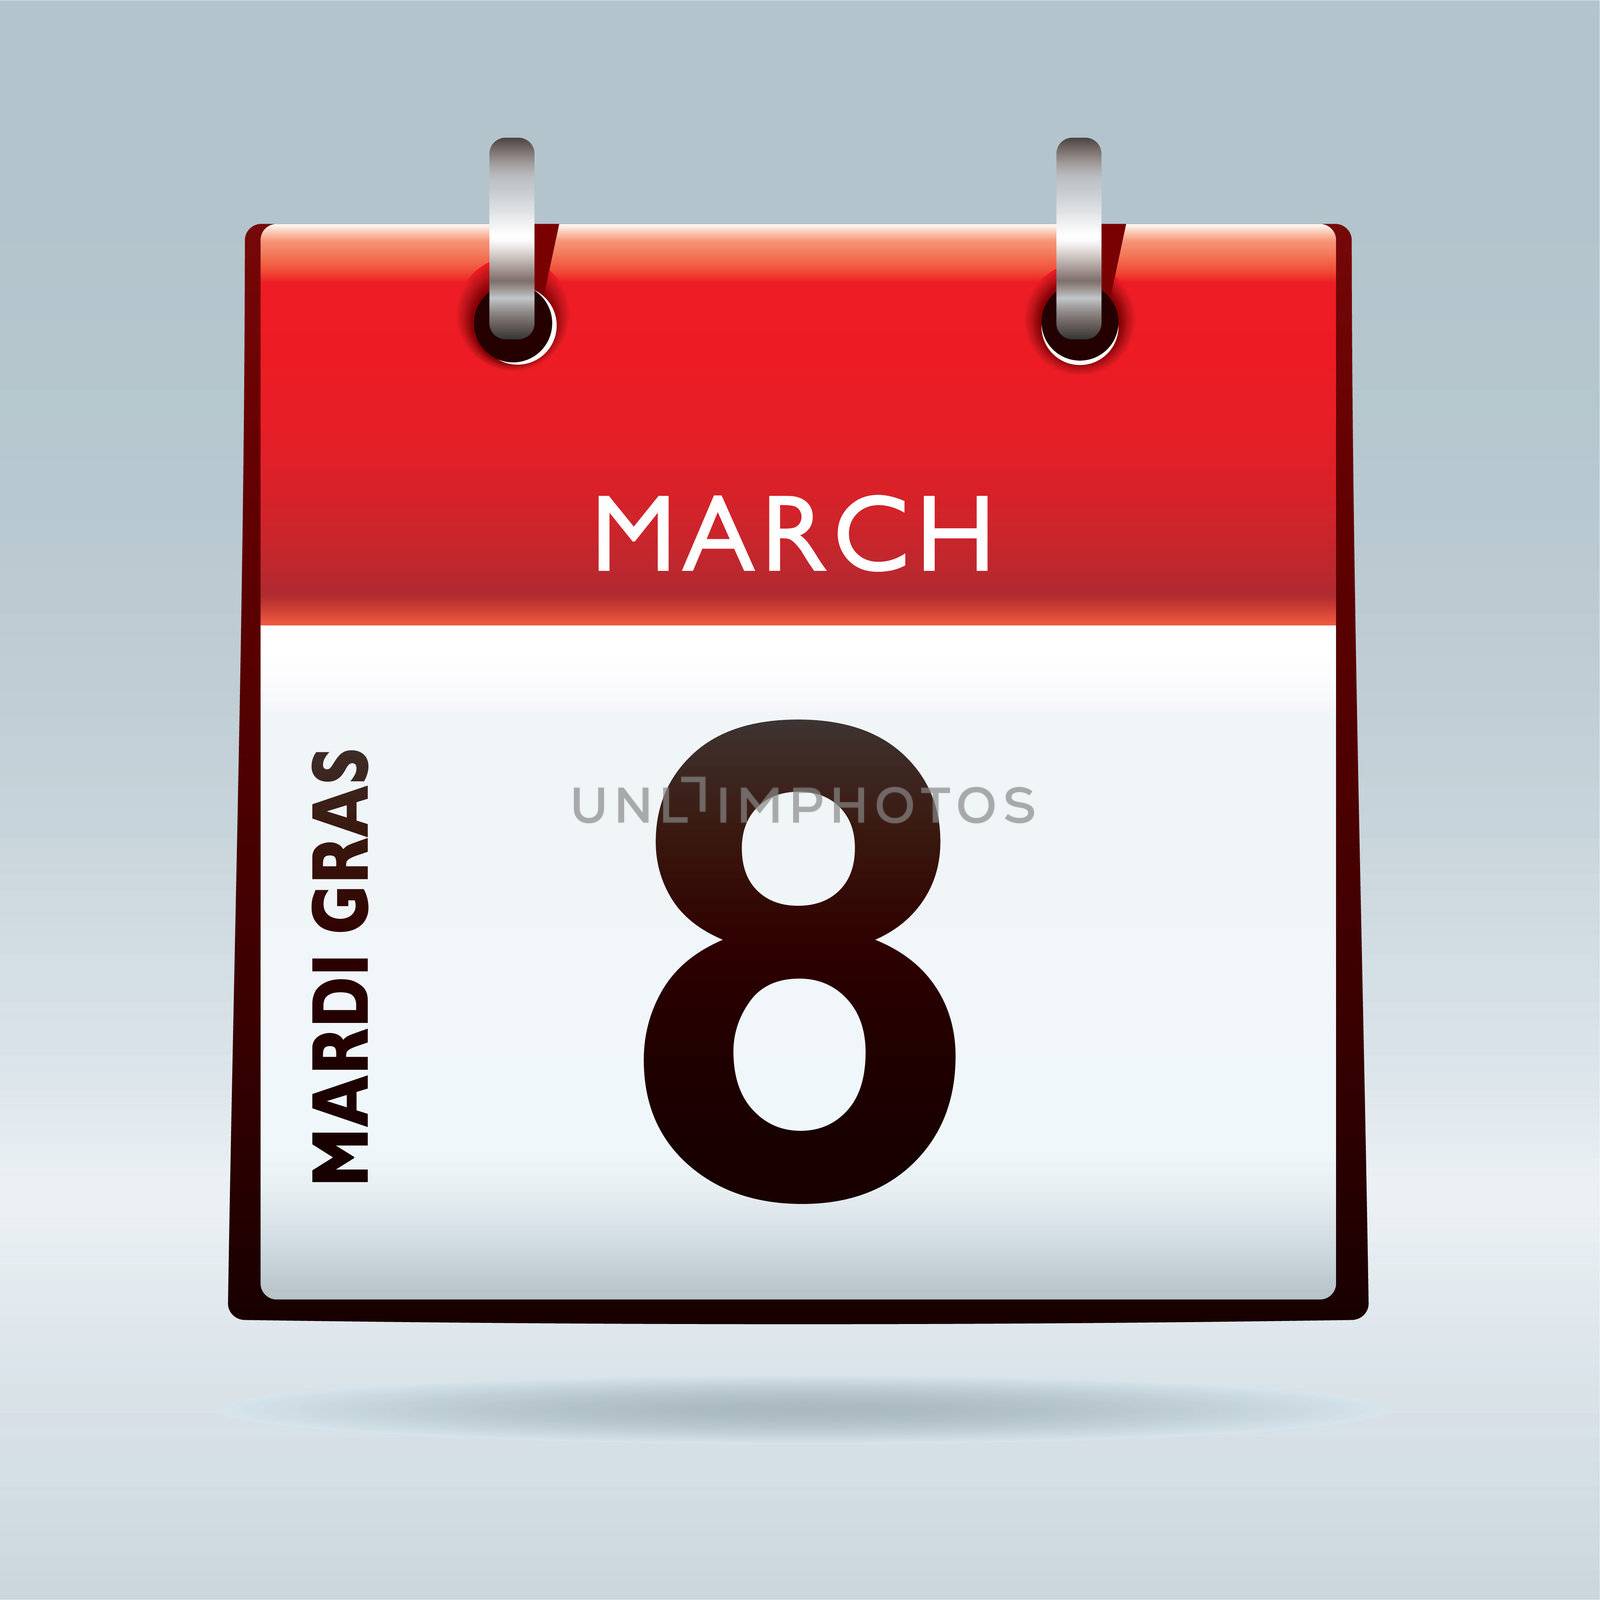 Mardi Gras Calendar icon for 2011 with red top